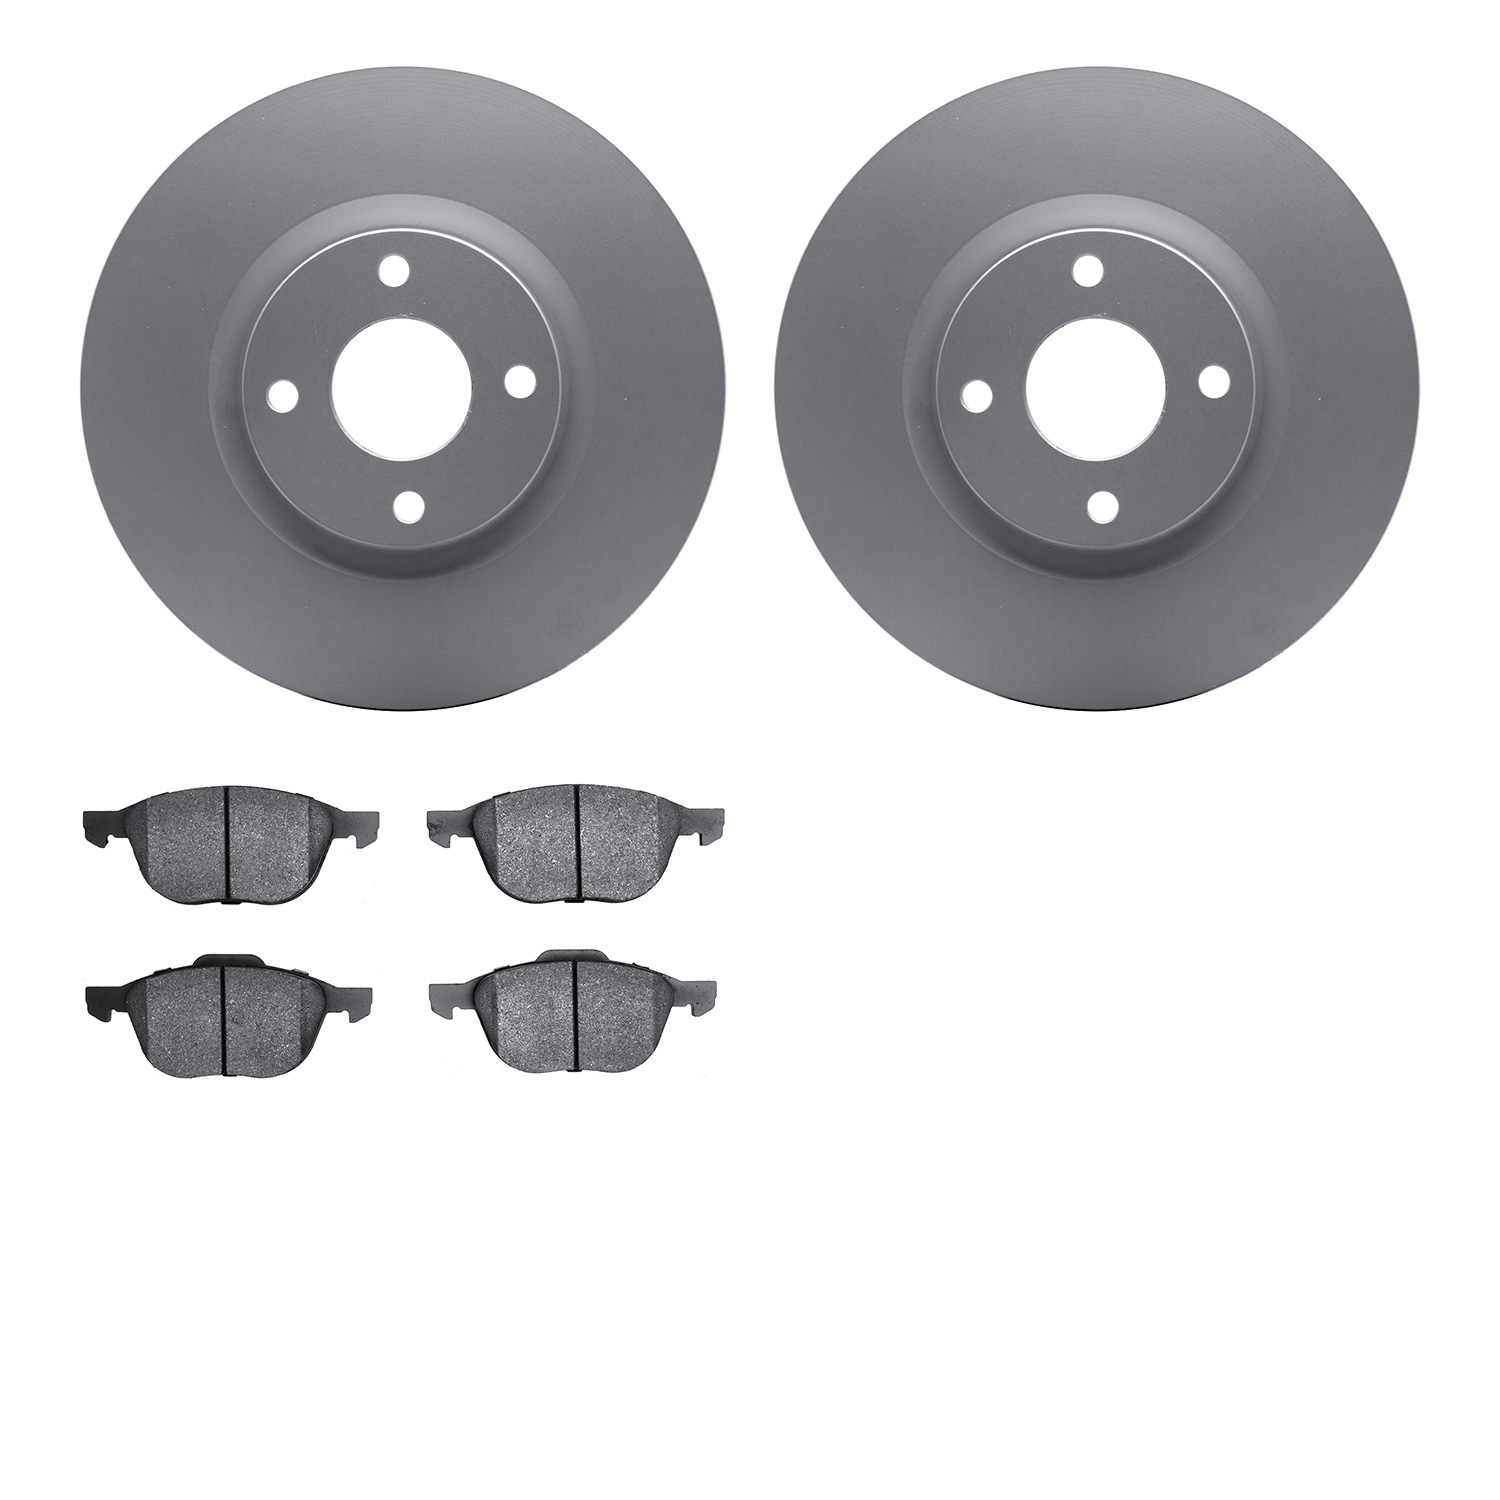 4302-54081 Geospec Brake Rotors with 3000-Series Ceramic Brake Pads Kit, Fits Select Ford/Lincoln/Mercury/Mazda, Position: Front